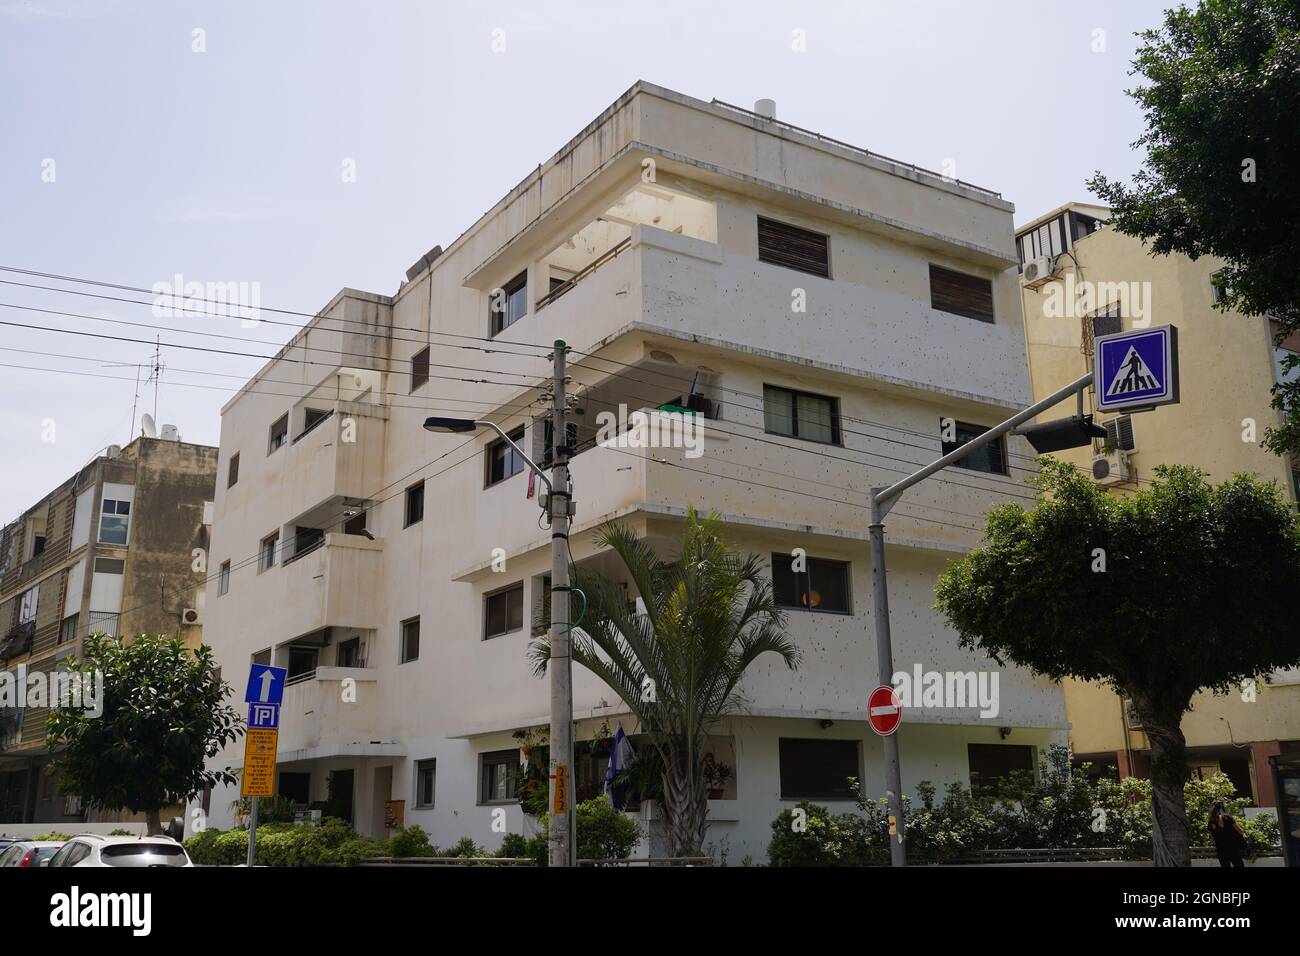 Bauhaus Architecture in Tel Aviv White City Zamenhof Street. The White City refers to a collection of over 4,000 buildings built in the Bauhaus or Int Stock Photo